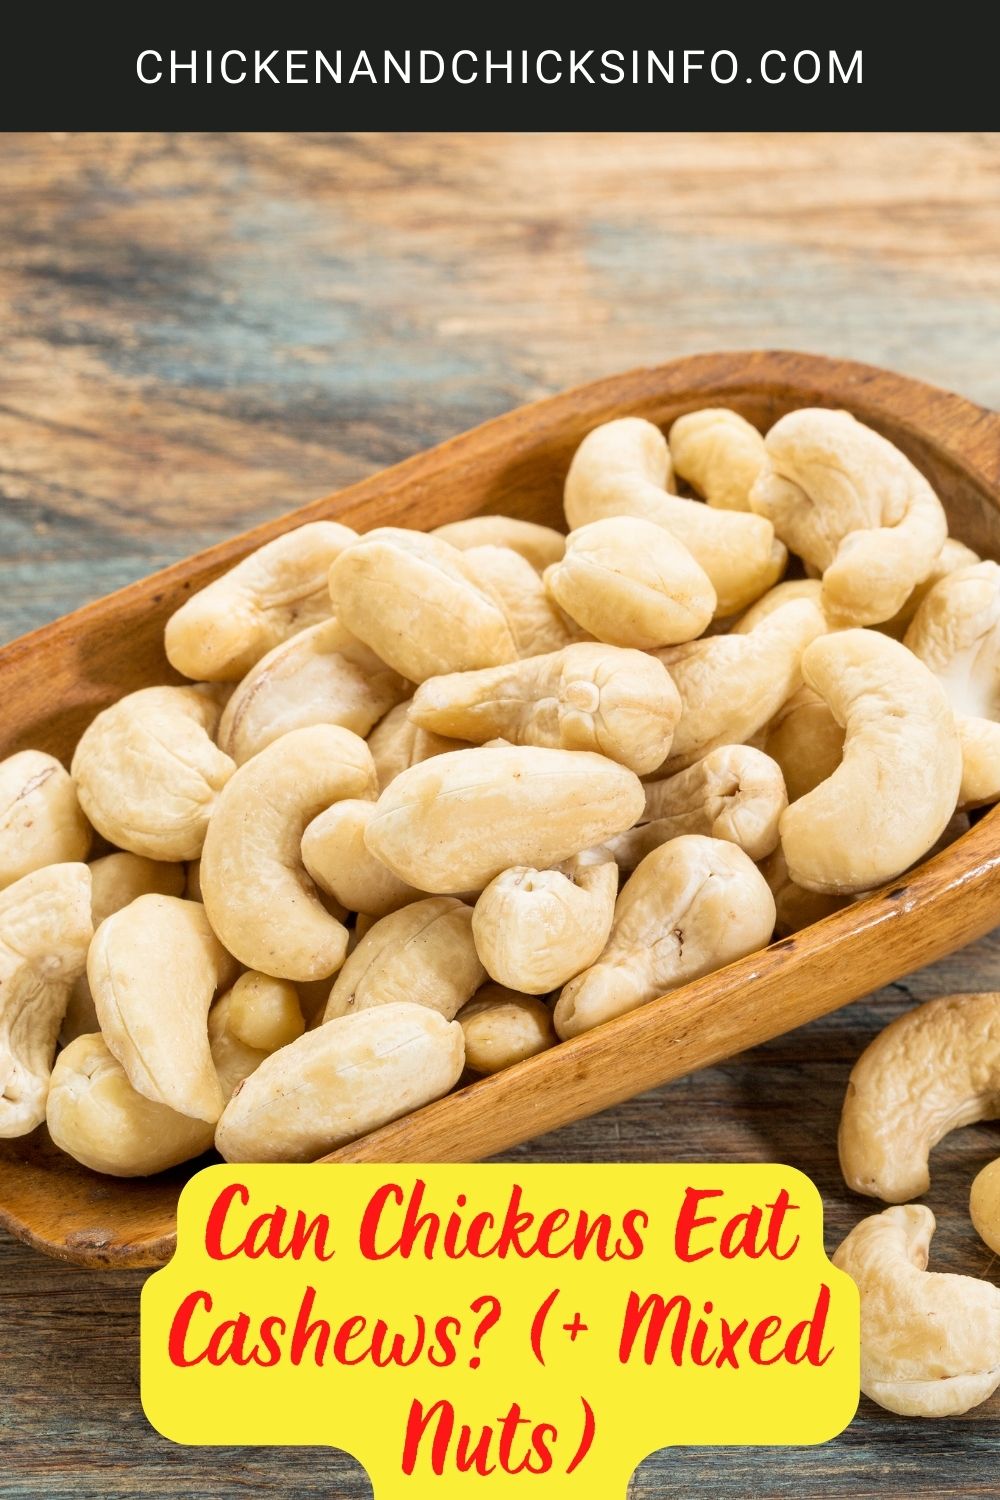 Can Chickens Eat Cashews (+ Mixed Nuts) poster.
